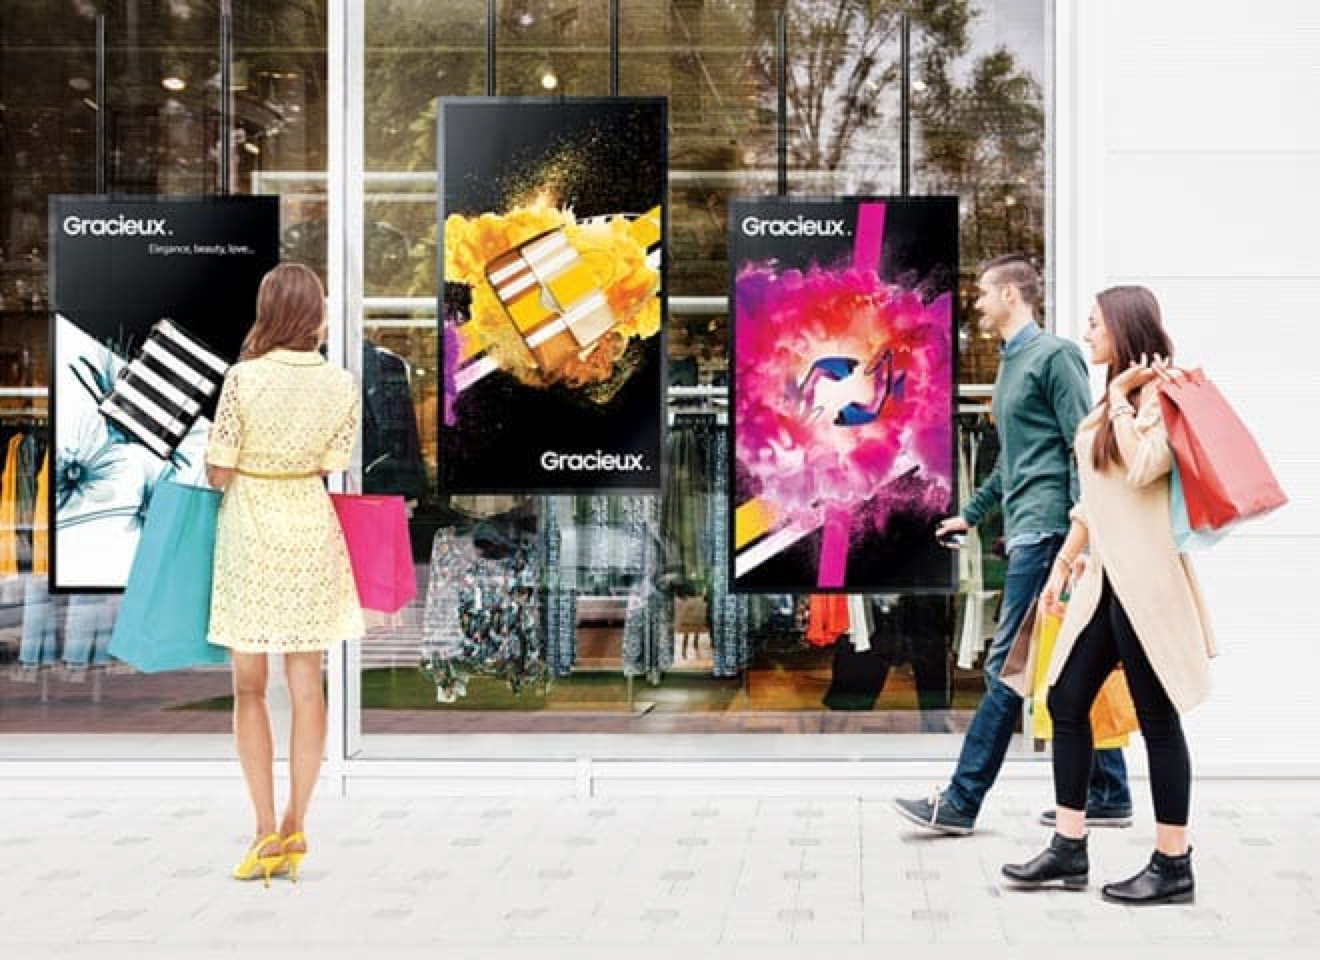 Digital Window Display for stores 